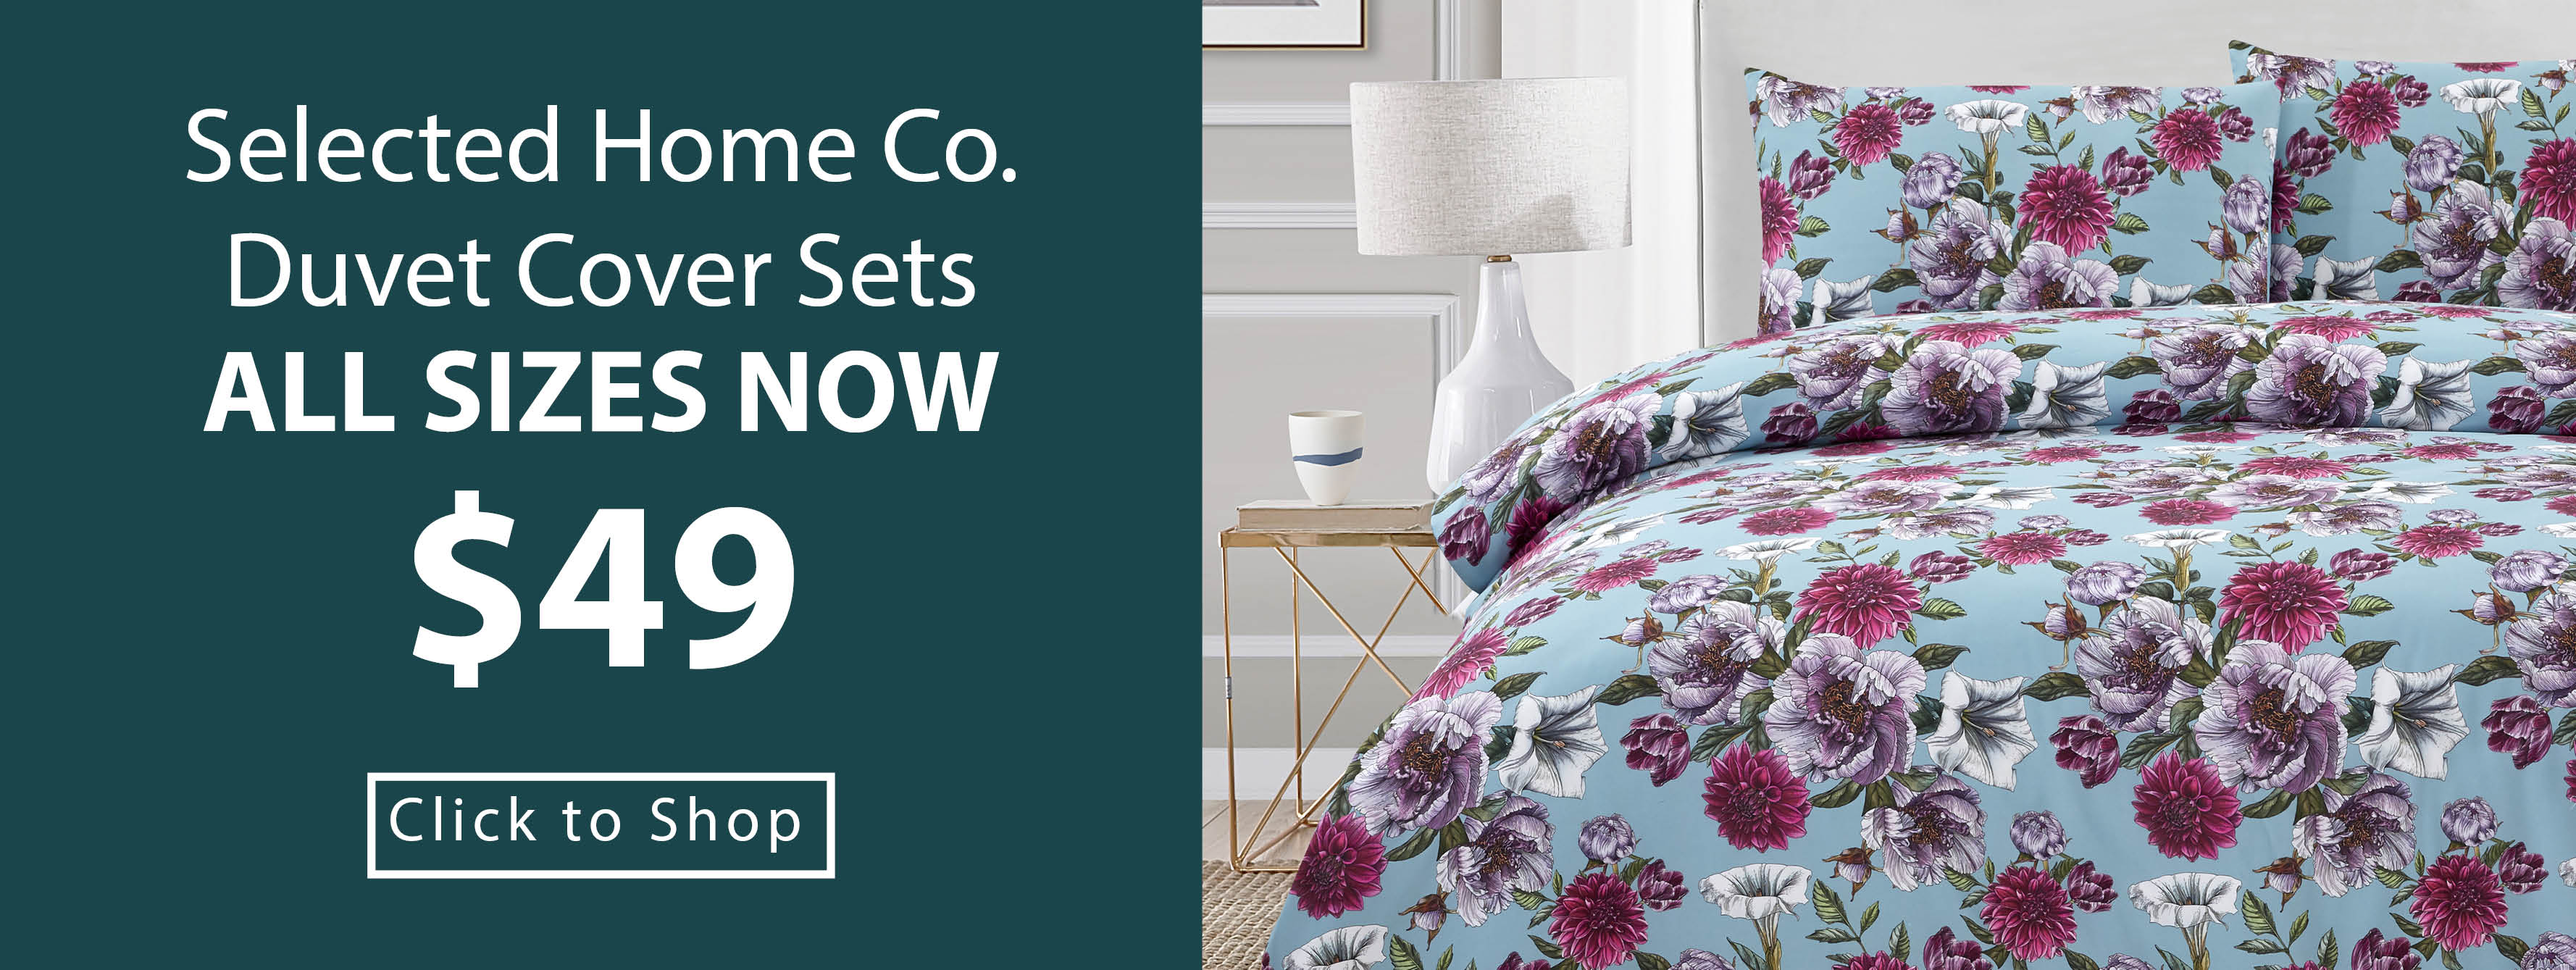 Selected Home Co. Duvet Covers $49 